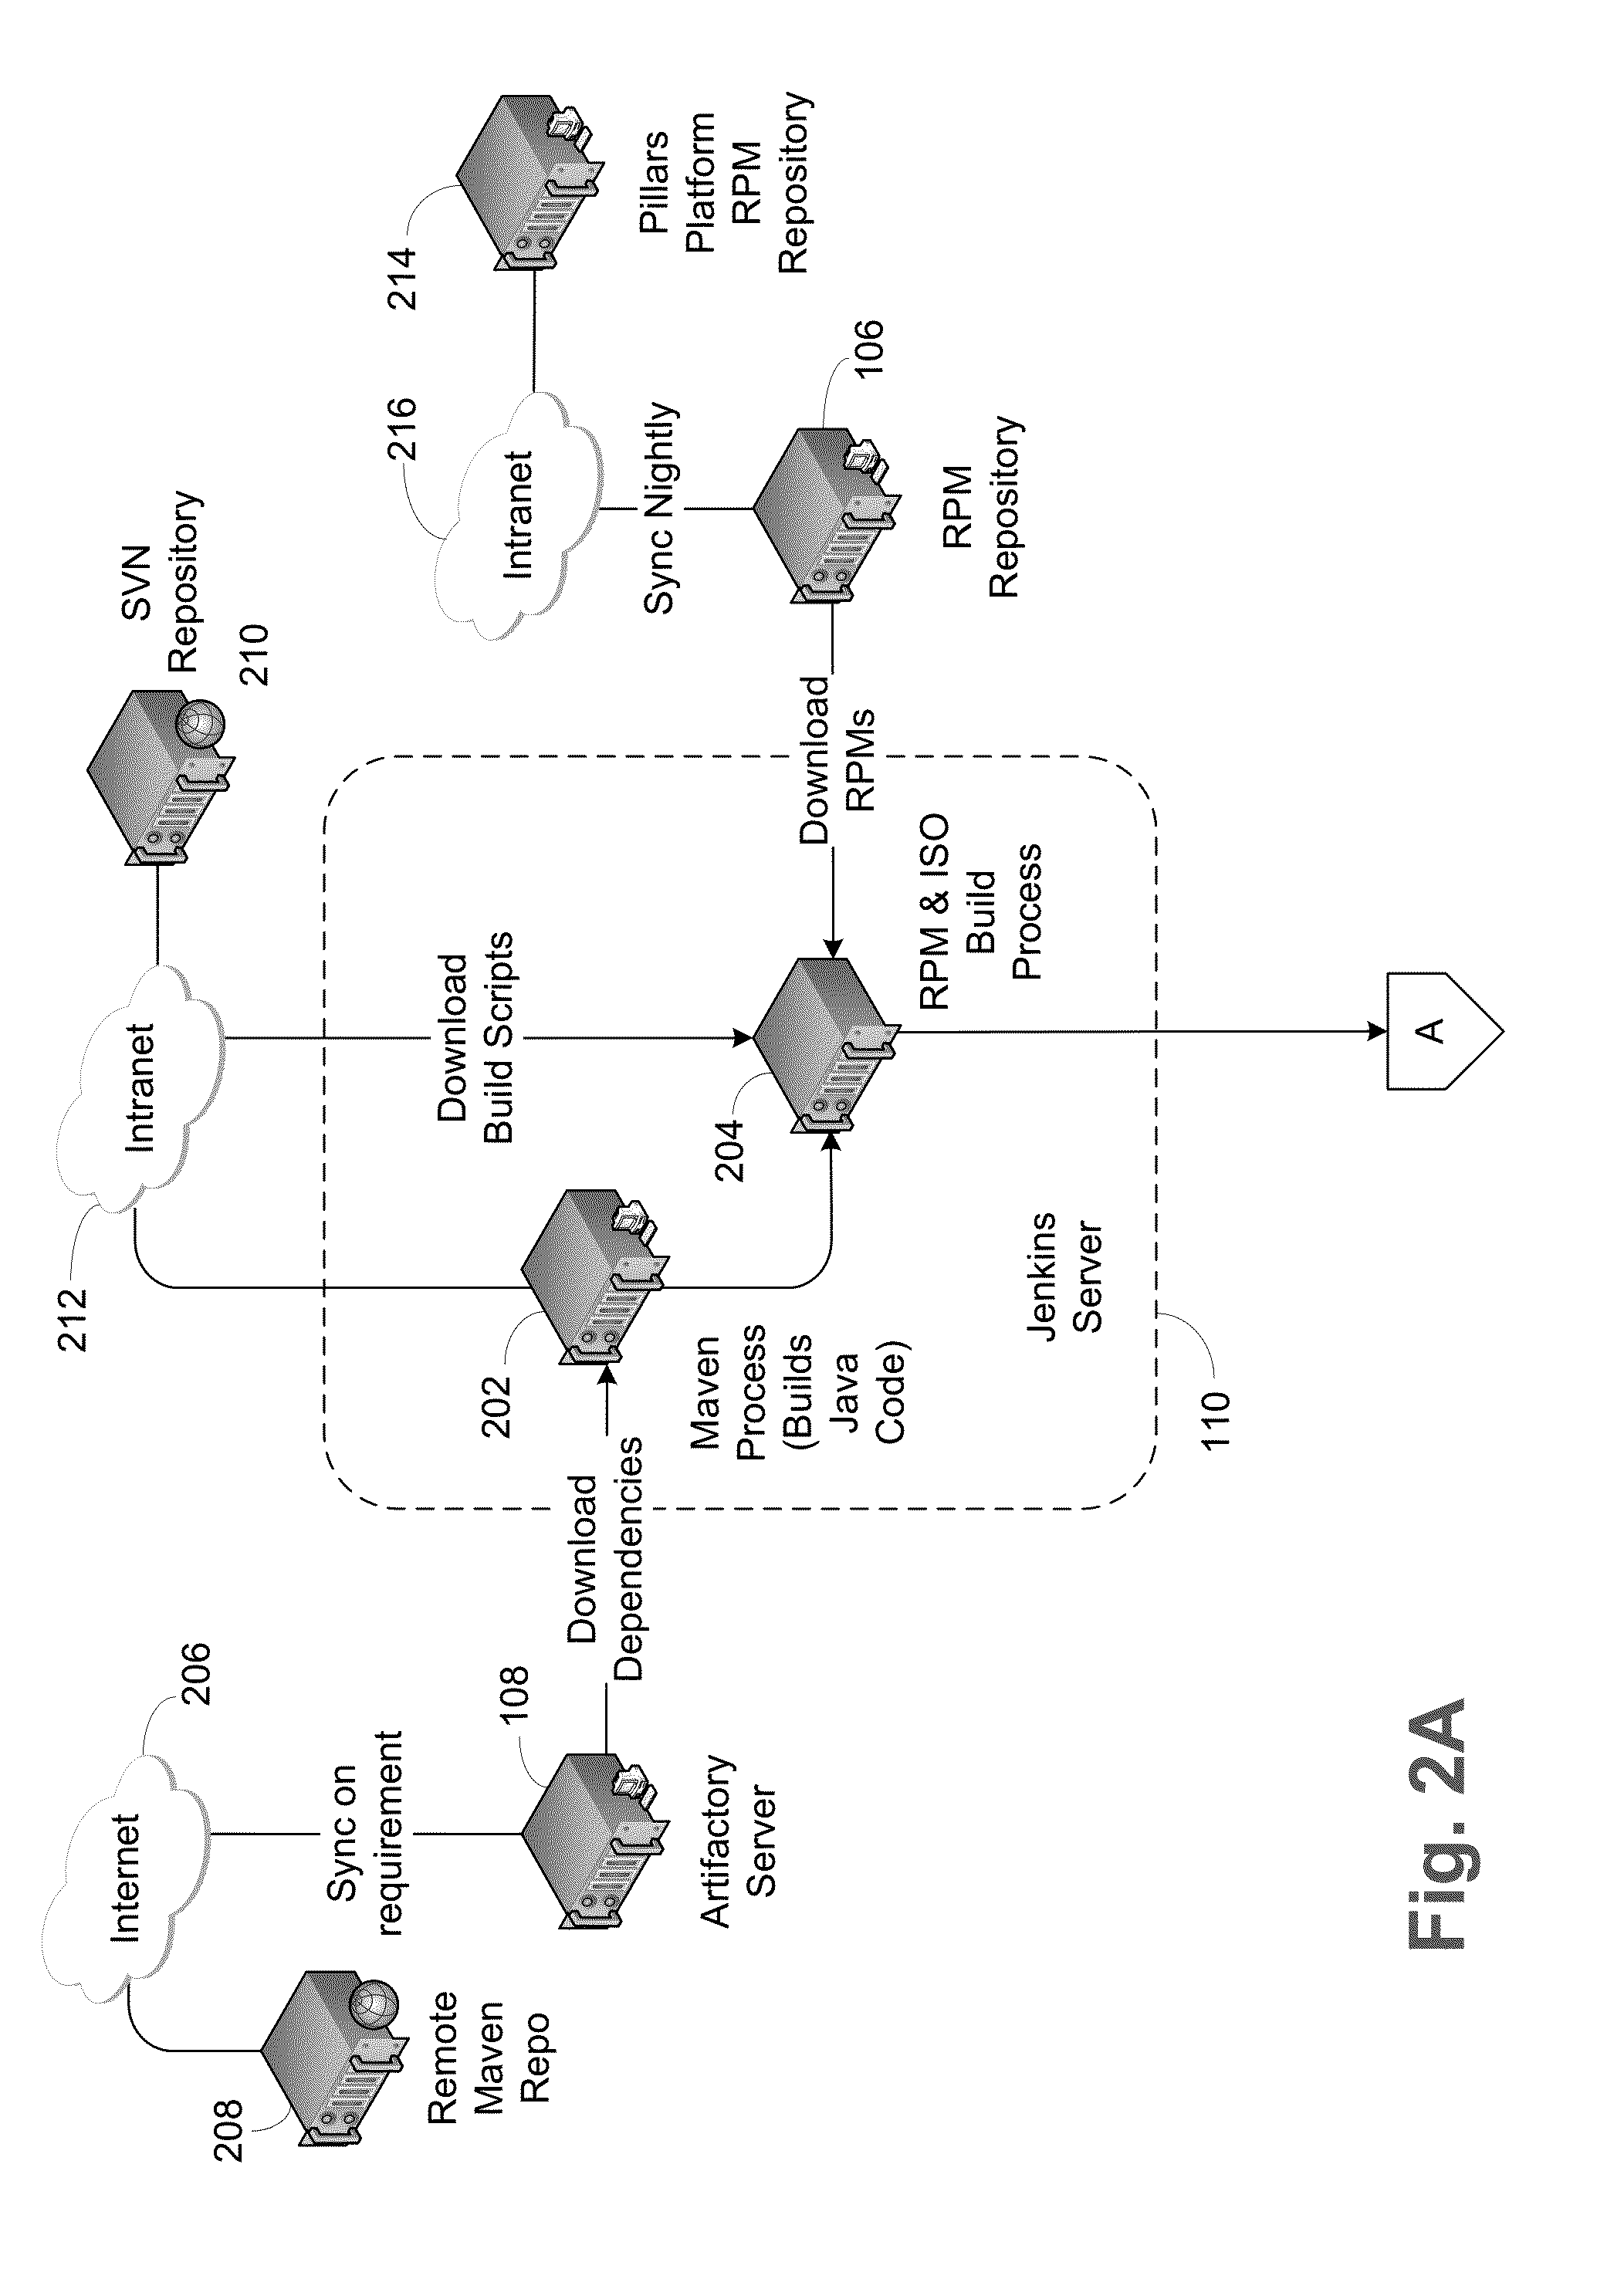 Message Controlled Application and Operating System Image Development and Deployment